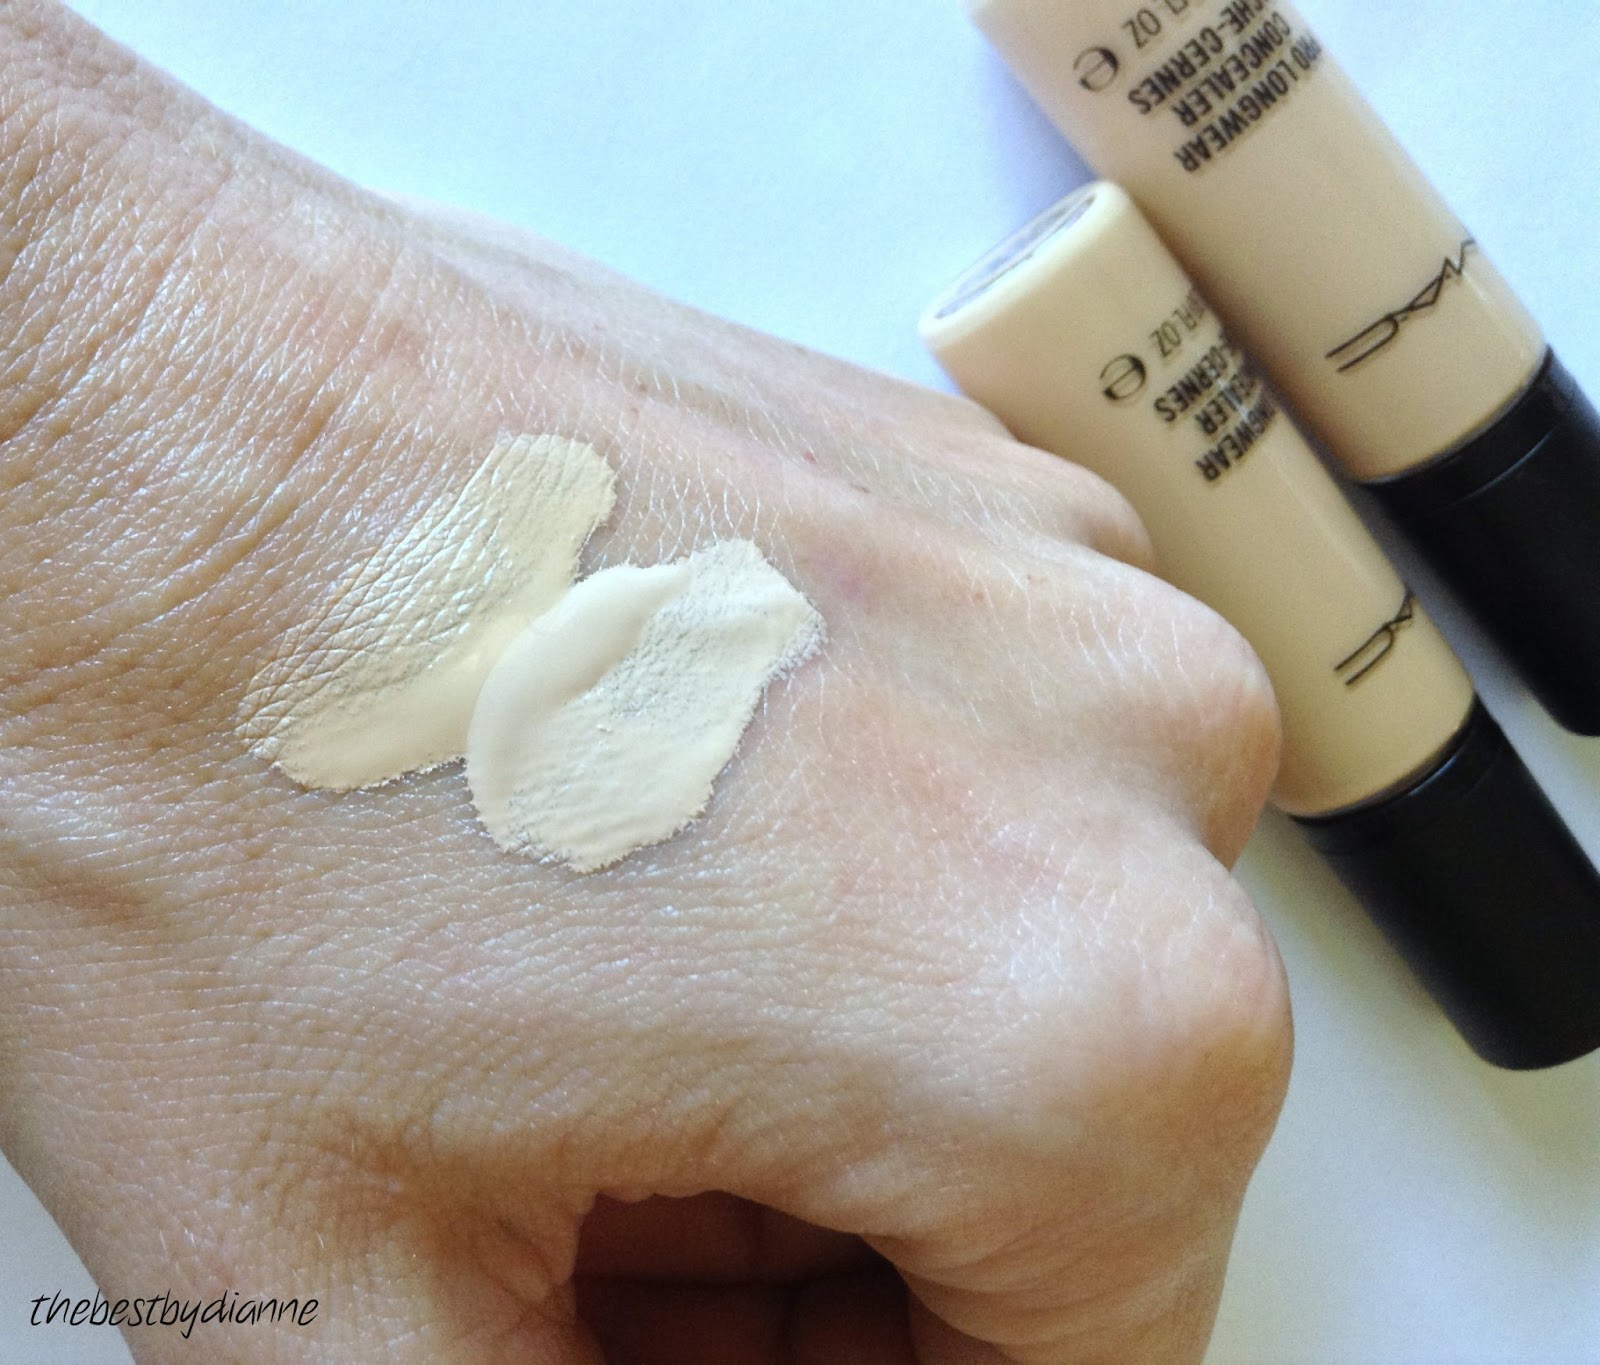 Only the Best Beauty: PRO CONCEALER NC15 NC20 (swatches)